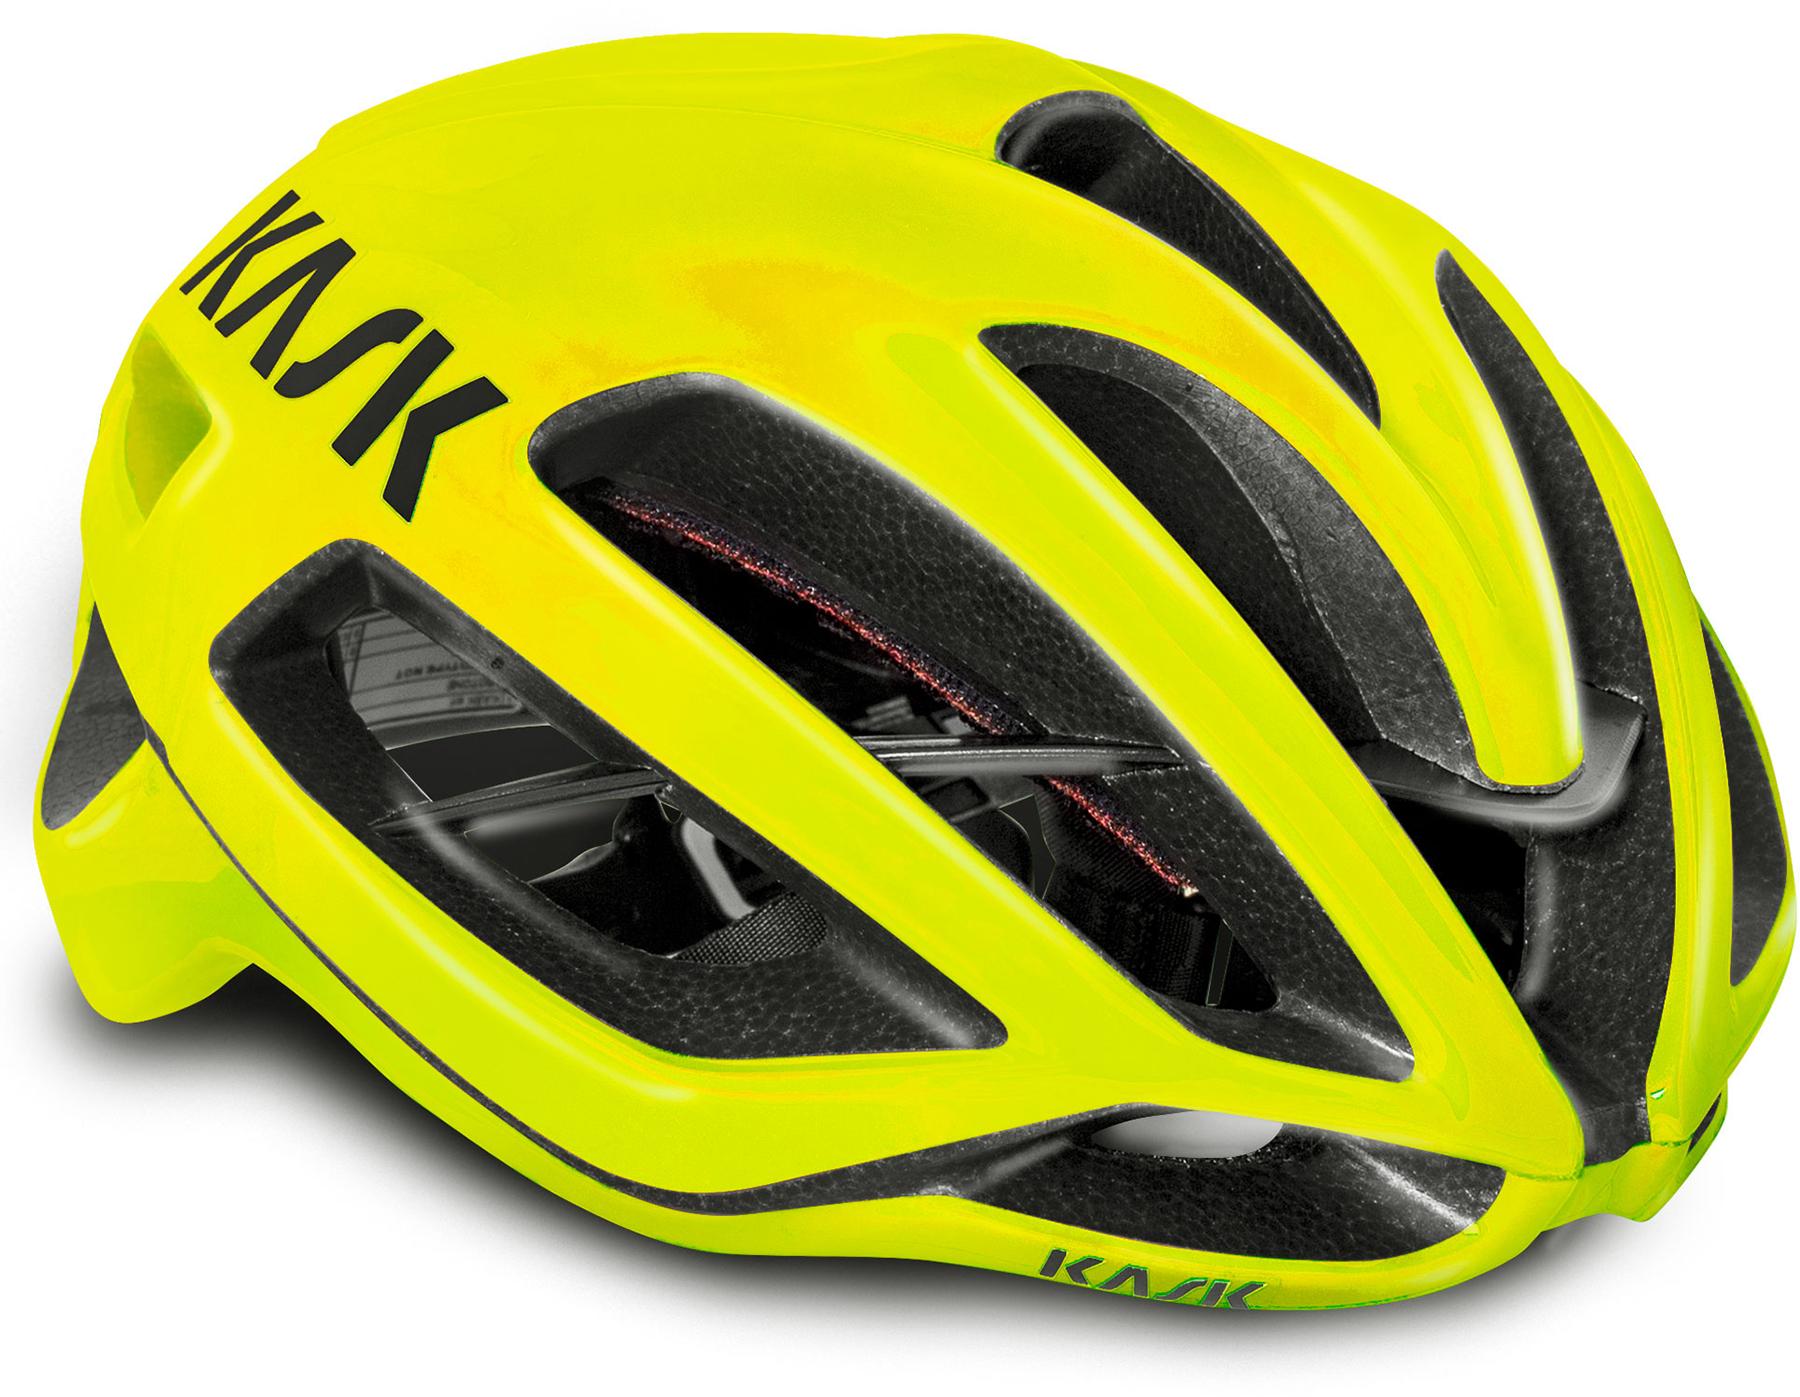 Kask Protone Road Helmet - Yellow - In Know Cycling